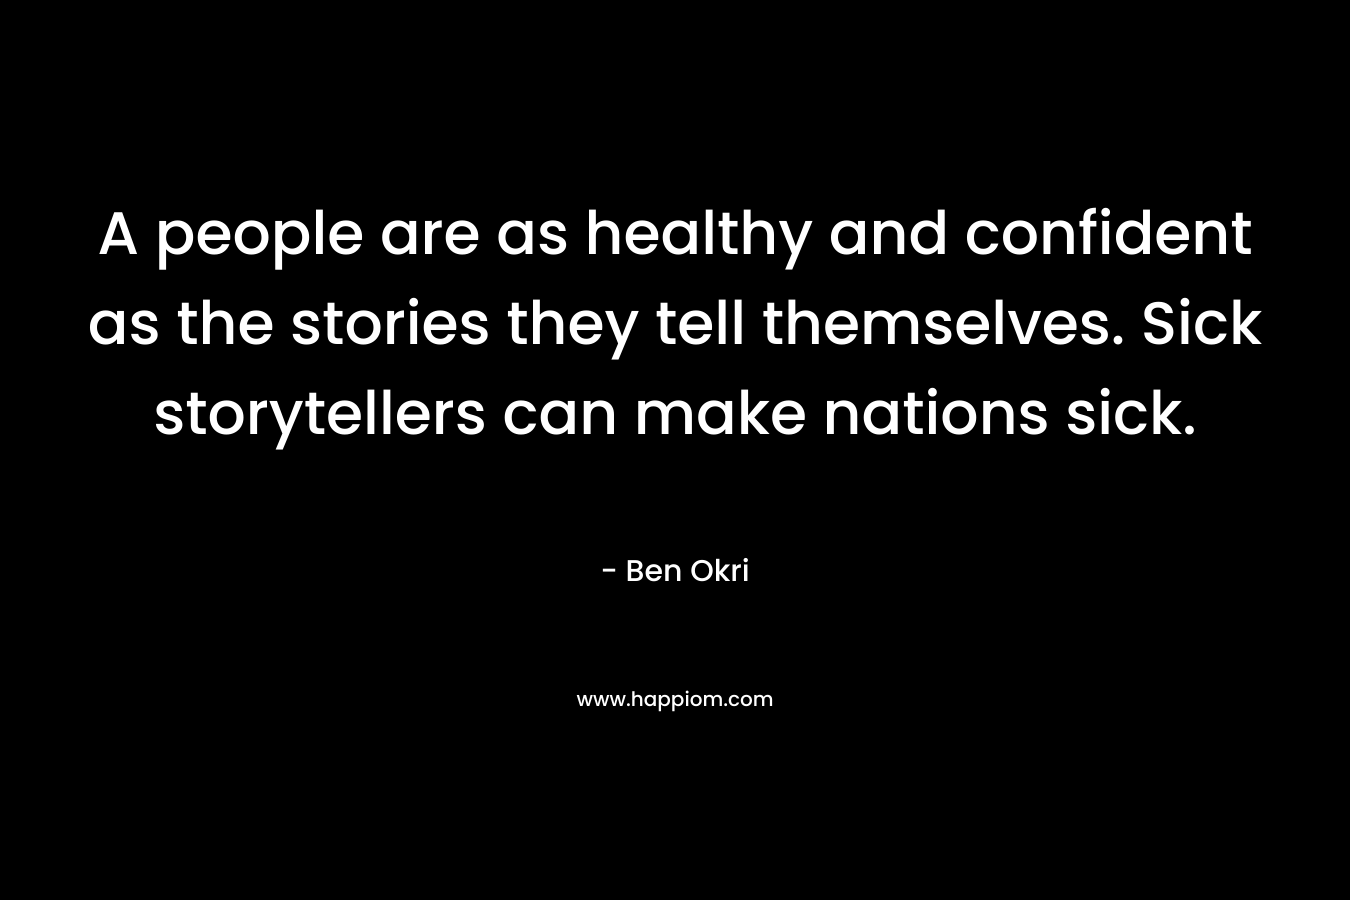 A people are as healthy and confident as the stories they tell themselves. Sick storytellers can make nations sick. – Ben Okri